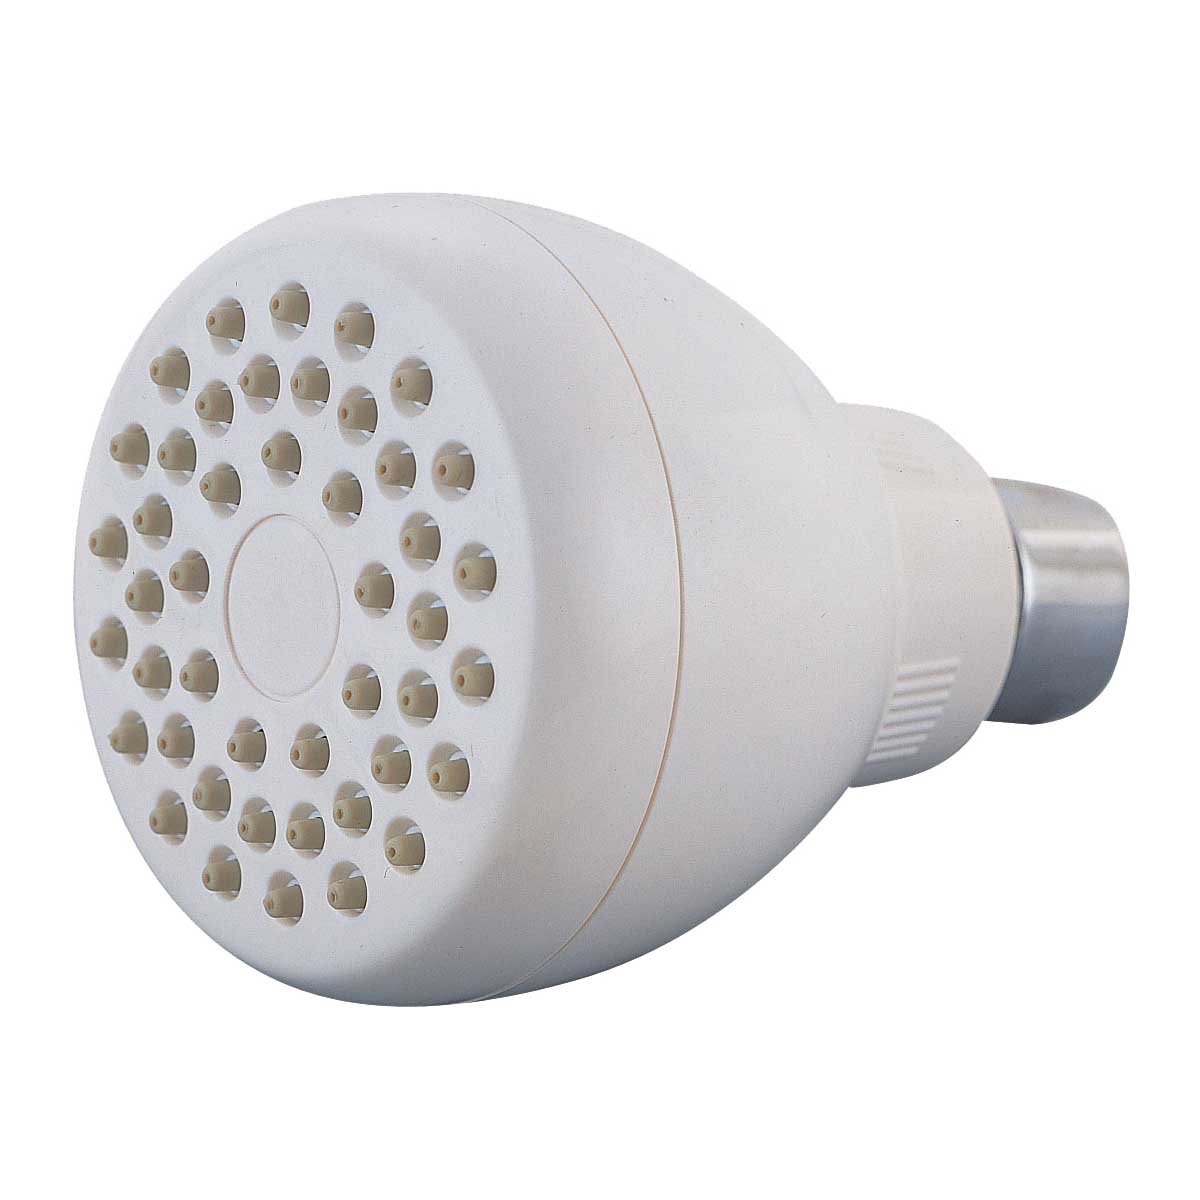 B11041WH Shower Head, 1.75 gpm, 1/2-14 NPT Connection, Threaded, 1-Spray Function, Plastic, White